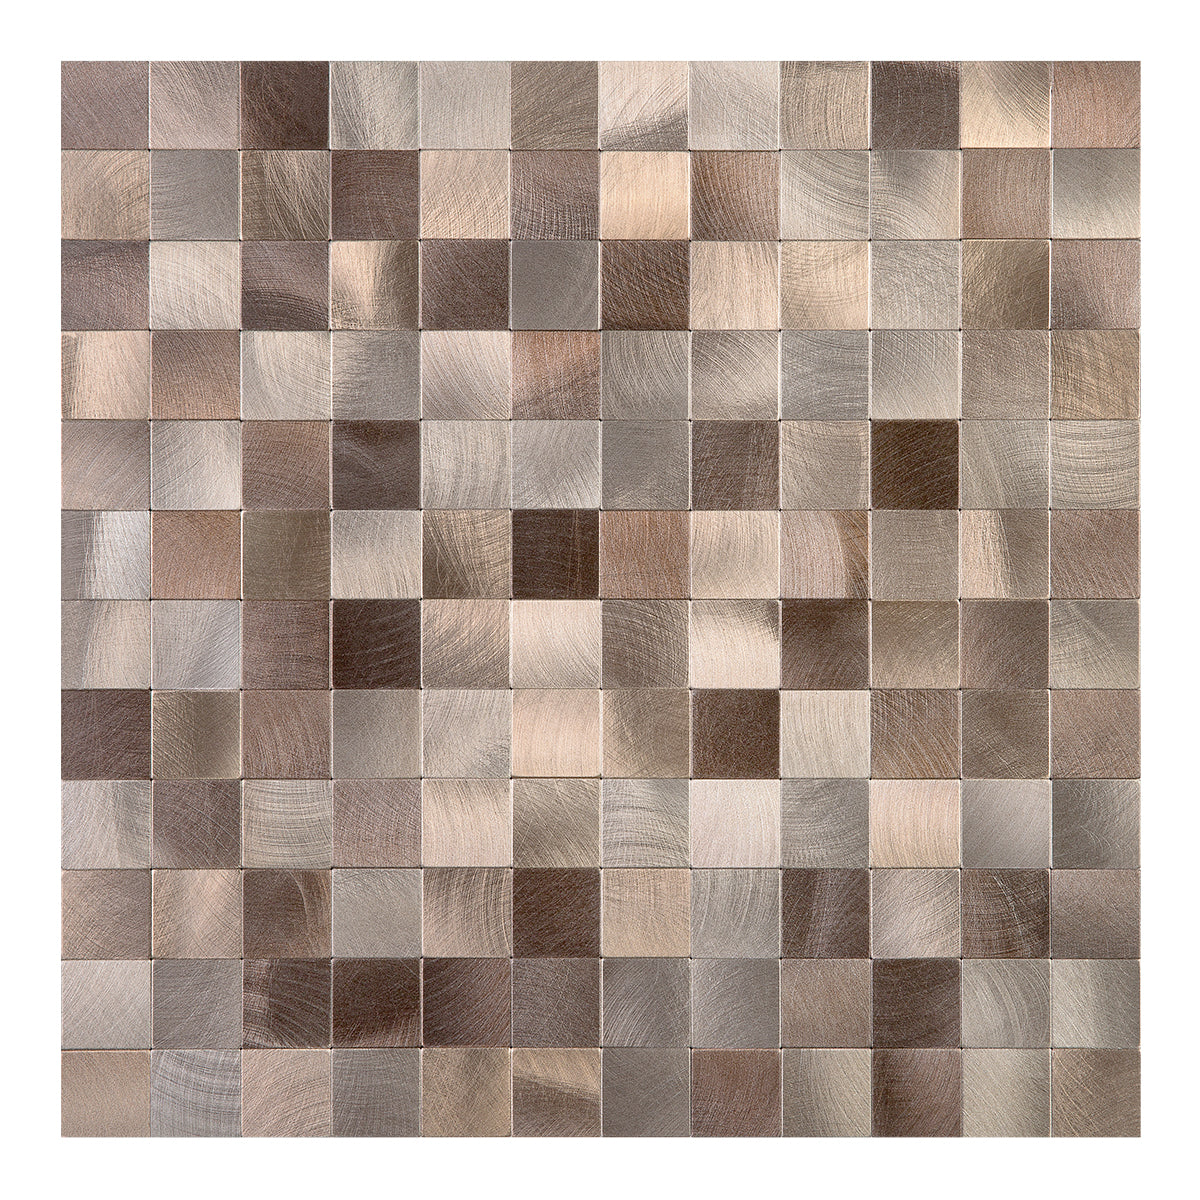 Decopus Metal Tile Peel and Stick Backsplash (MS25 Copper Brown Muted-Gold 12in x 12in. 4mm thick)